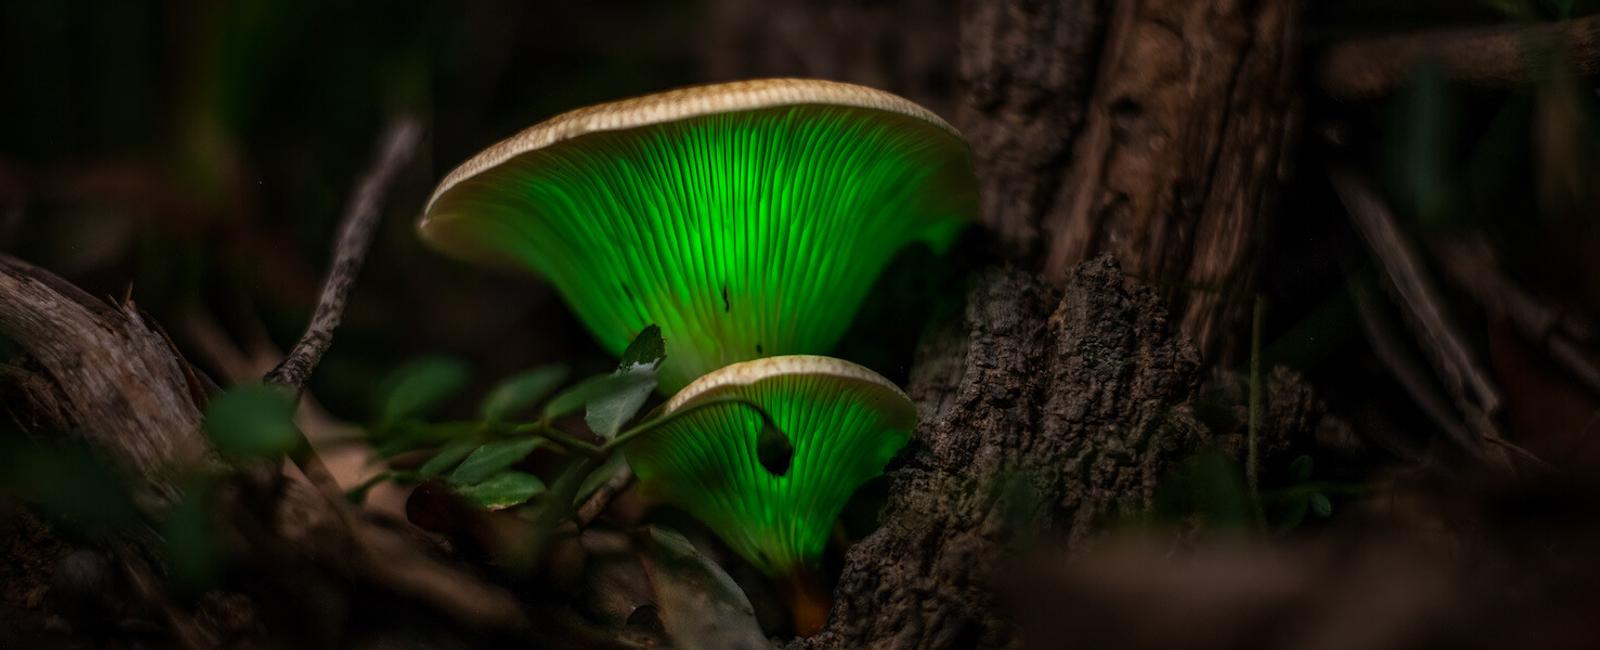 The Complete Guide to Ghost Mushrooms